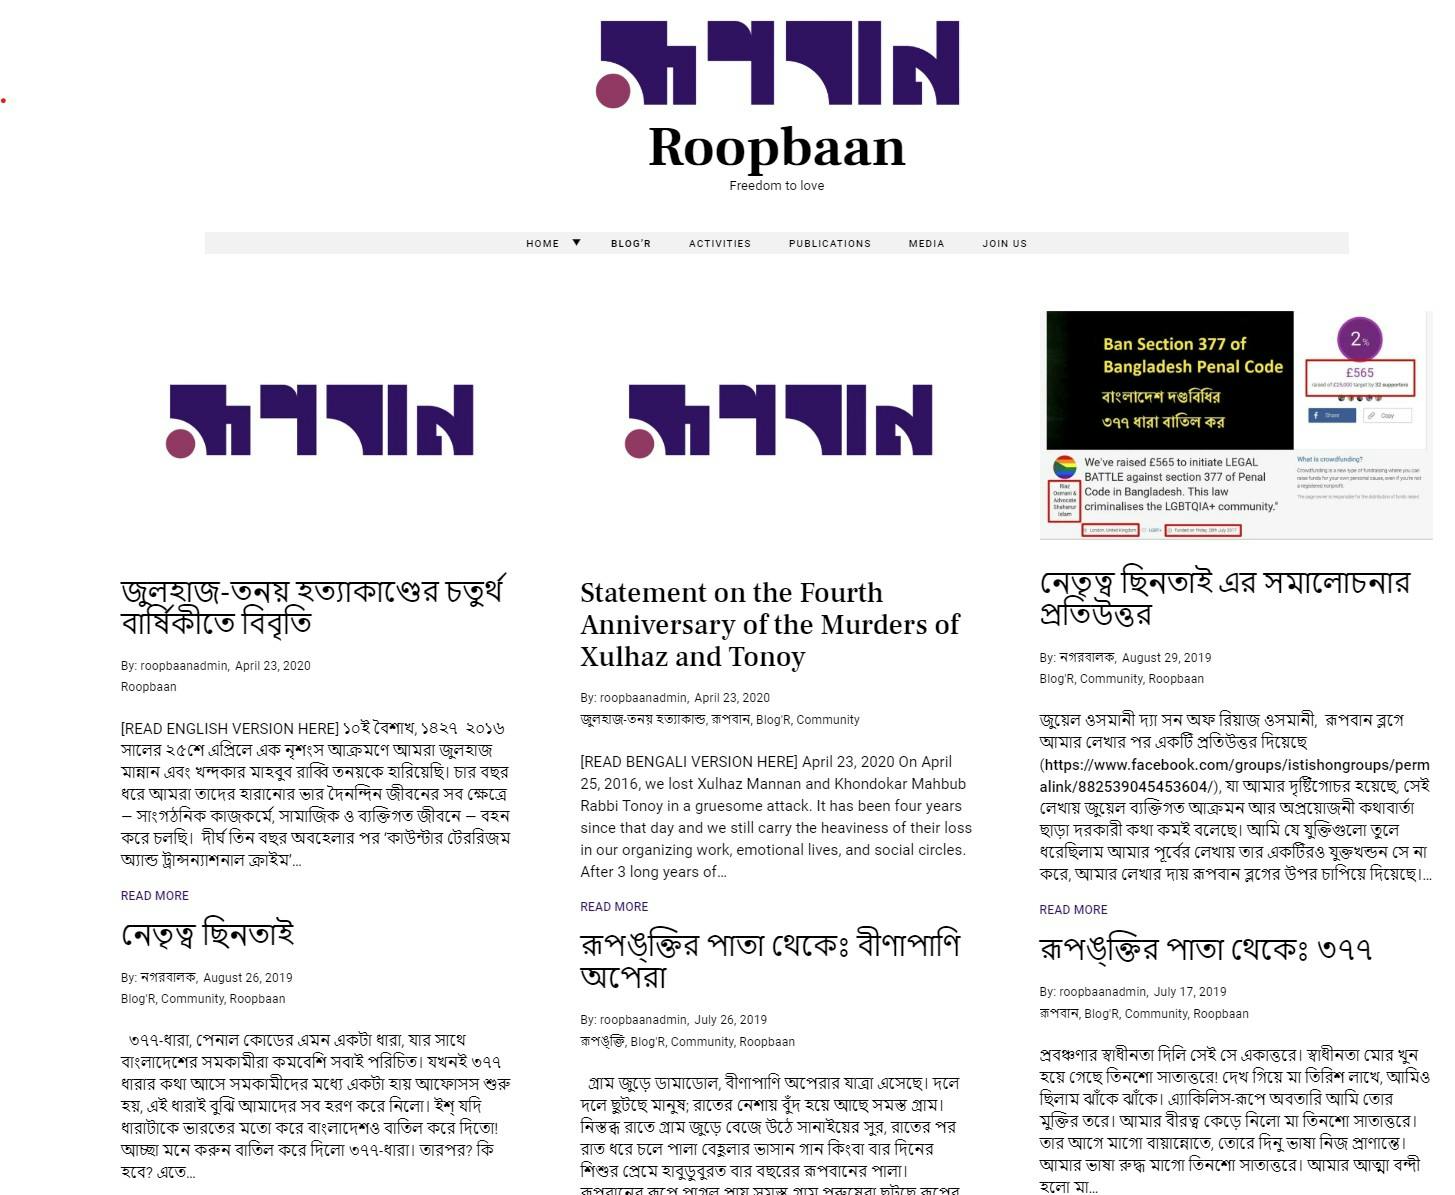 Screen grab of the Roopbaan publication section.